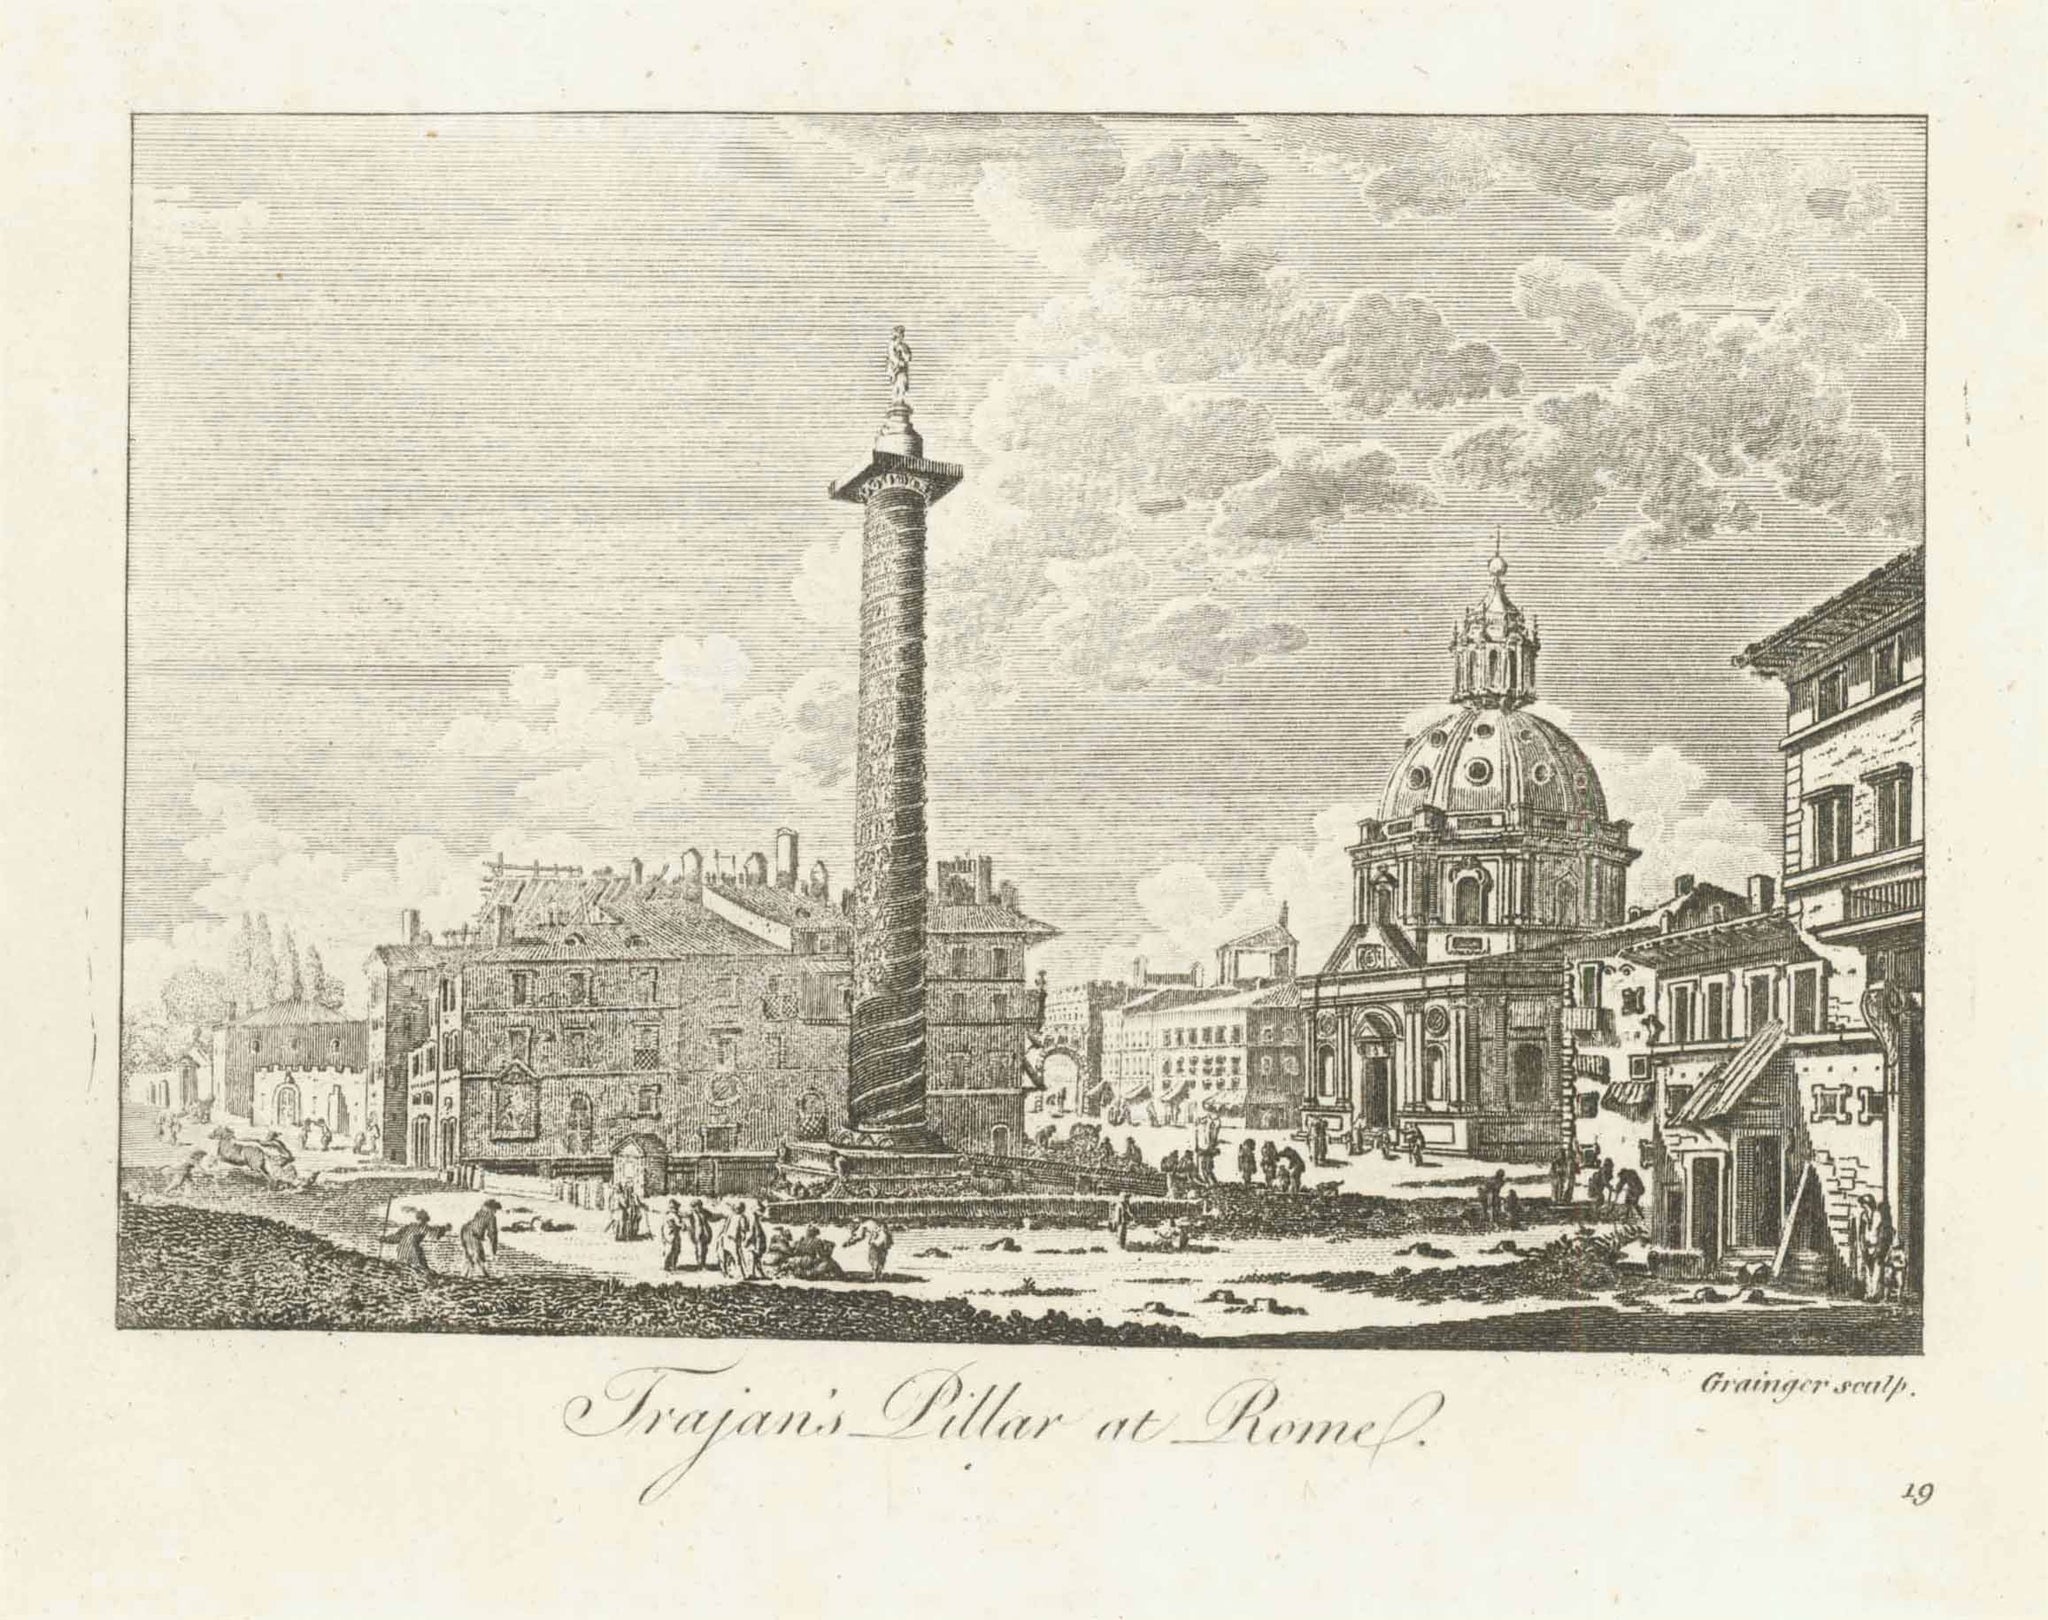 "Trajan's Piller at Rome"  Copper engraving by Grainger published 1789. From "A New System of Geography" by Thomas Bankes.  Original antique print  